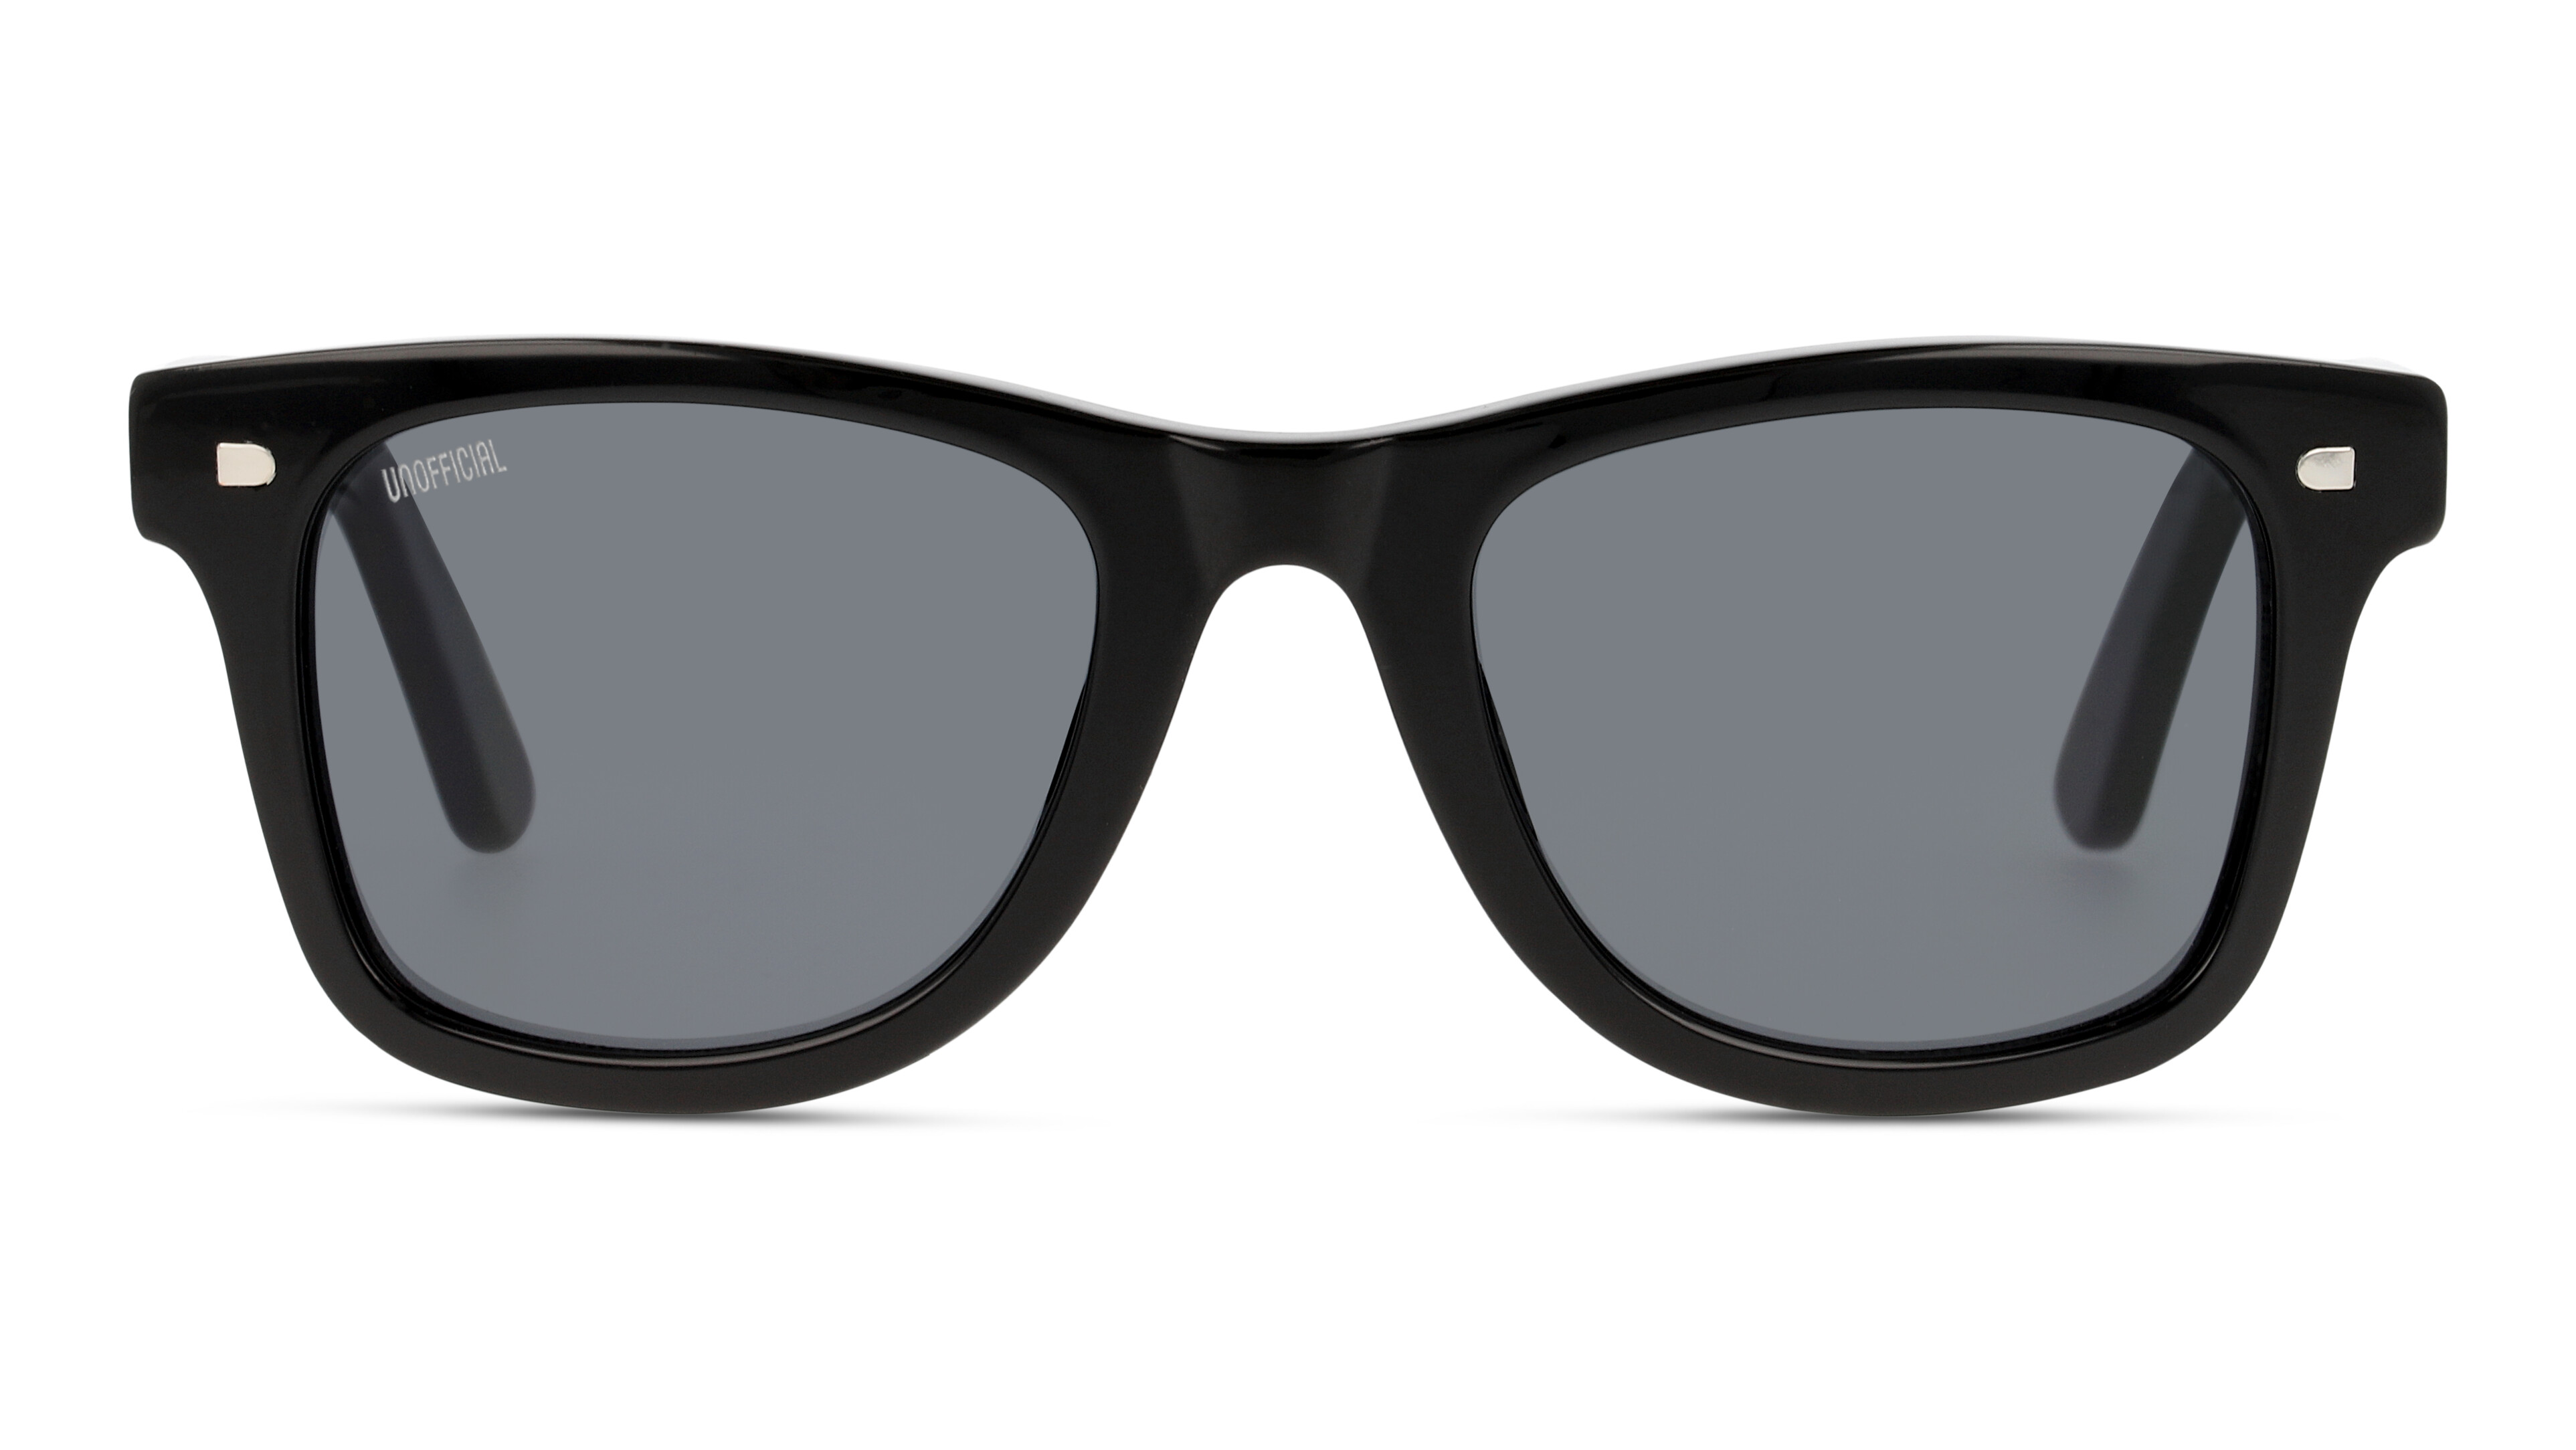 [products.image.front] UNOFFICIAL UNSU0055 BBG0 Sonnenbrille